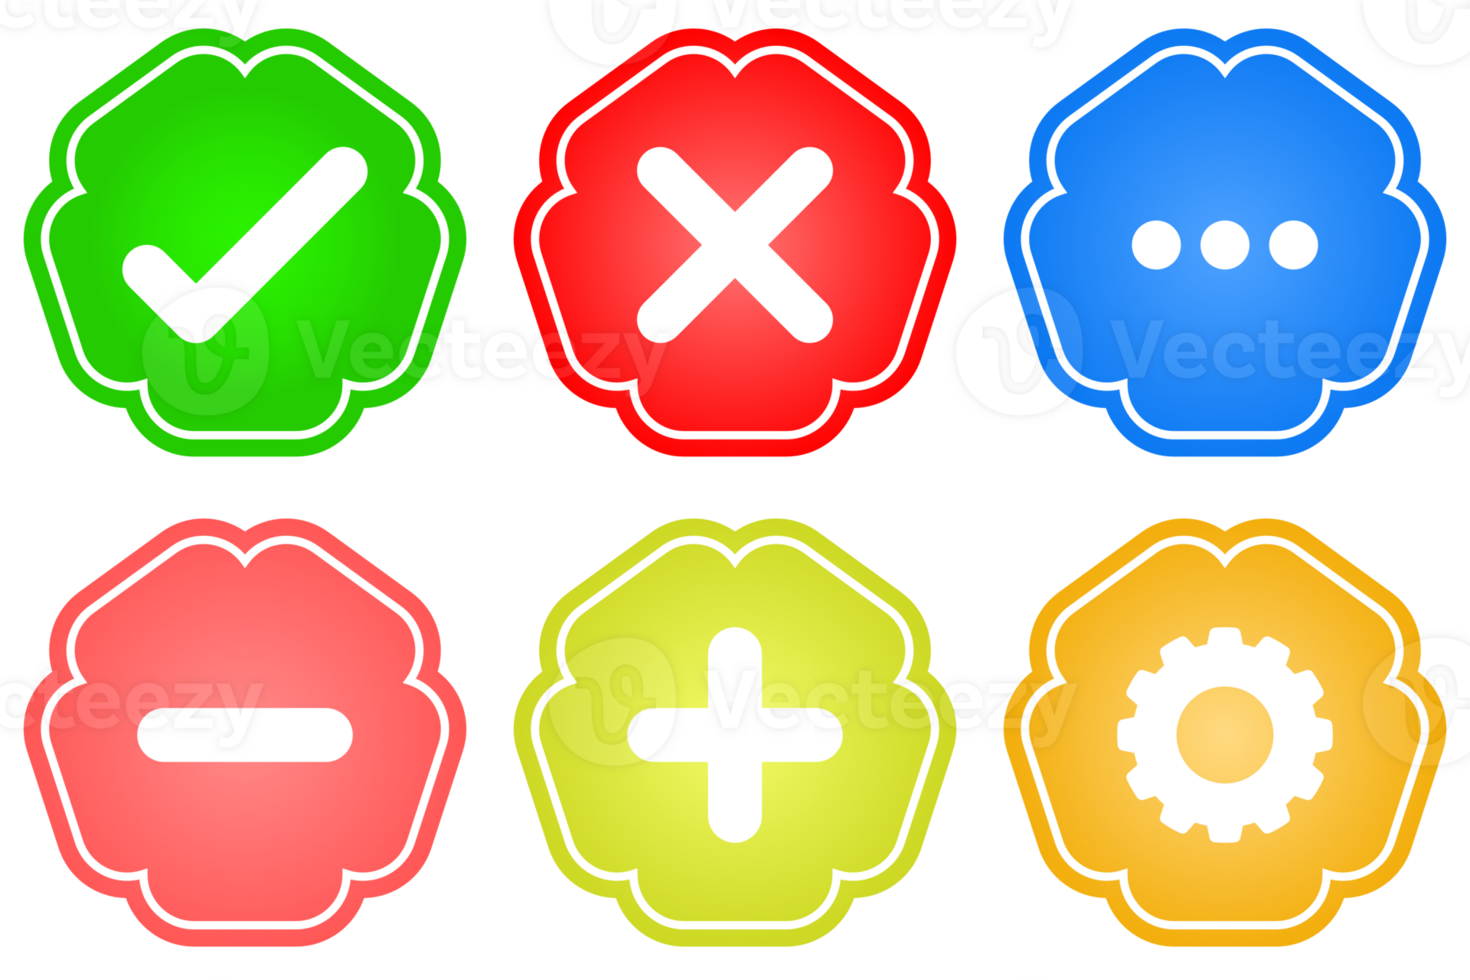 Right wrong cross customize Jagged shape colors icon set png